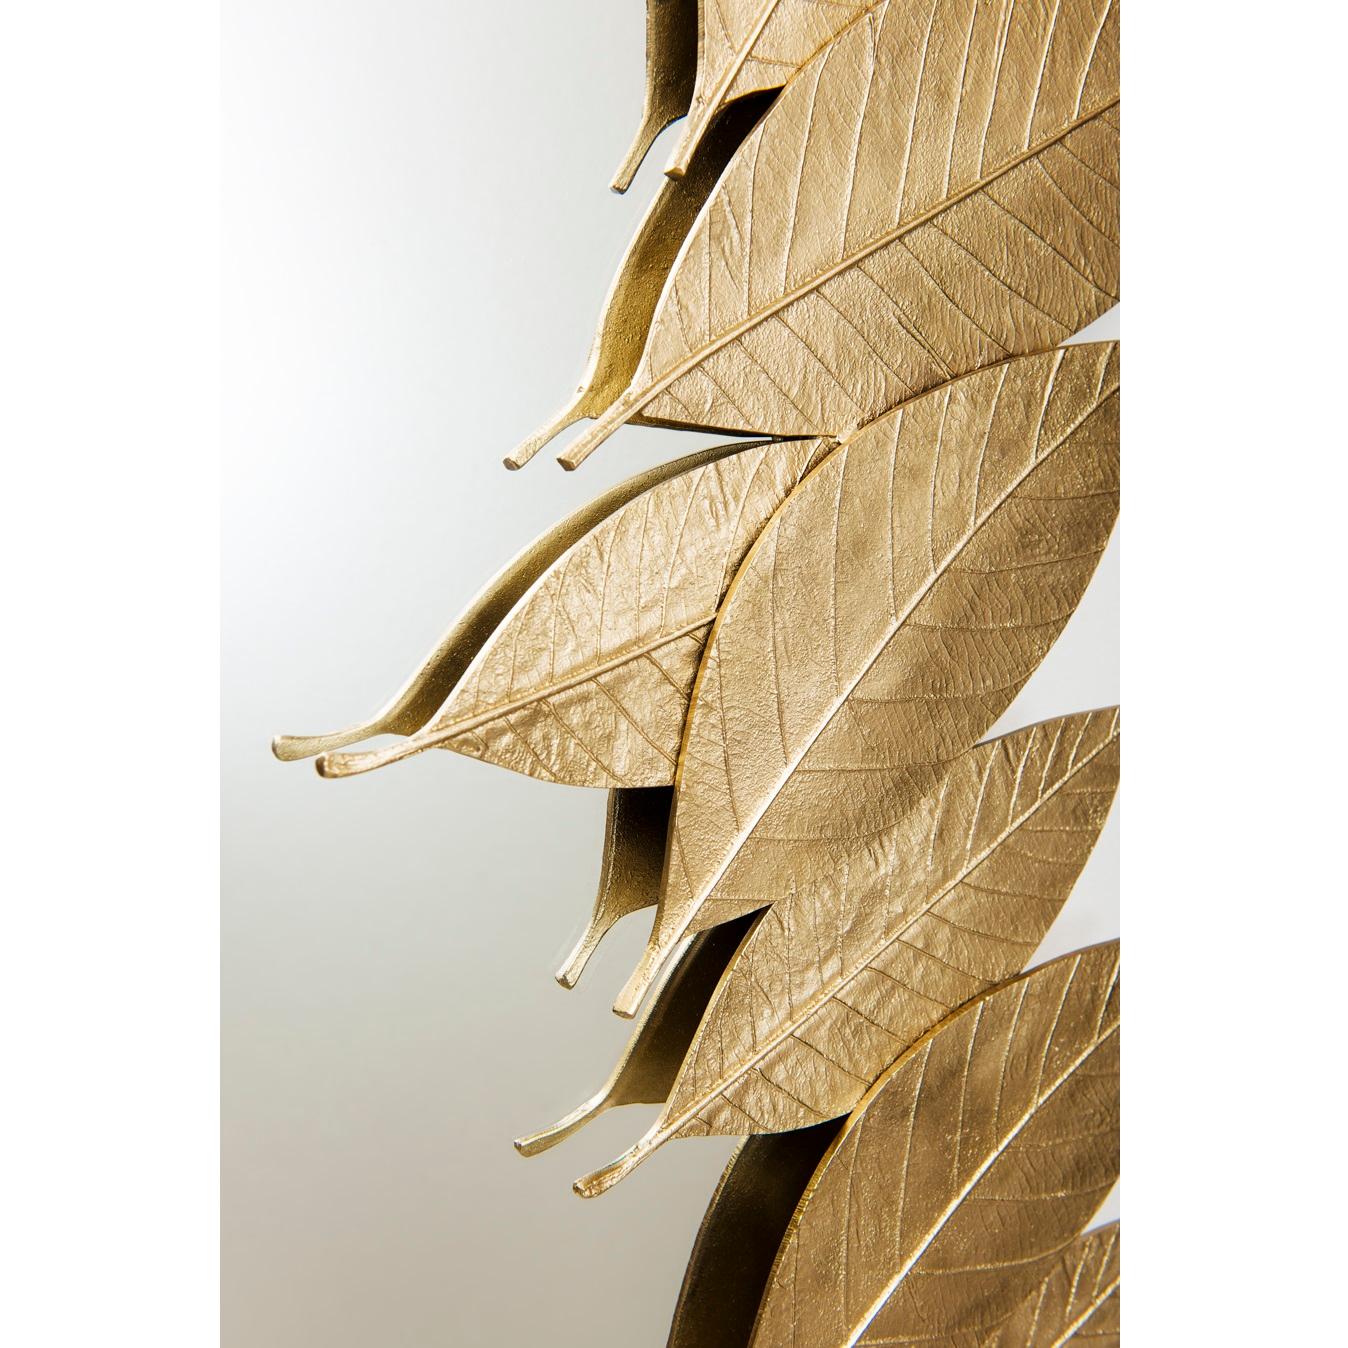 This mirror is made from leaves molded in brass casting, evokes the falling of autumn leaves around a pond. The leaves are assembled by hand by artisans.
Frame: Cast brass in Brass, Antique Brass, Silver, Antique Silver, Copper or Antique